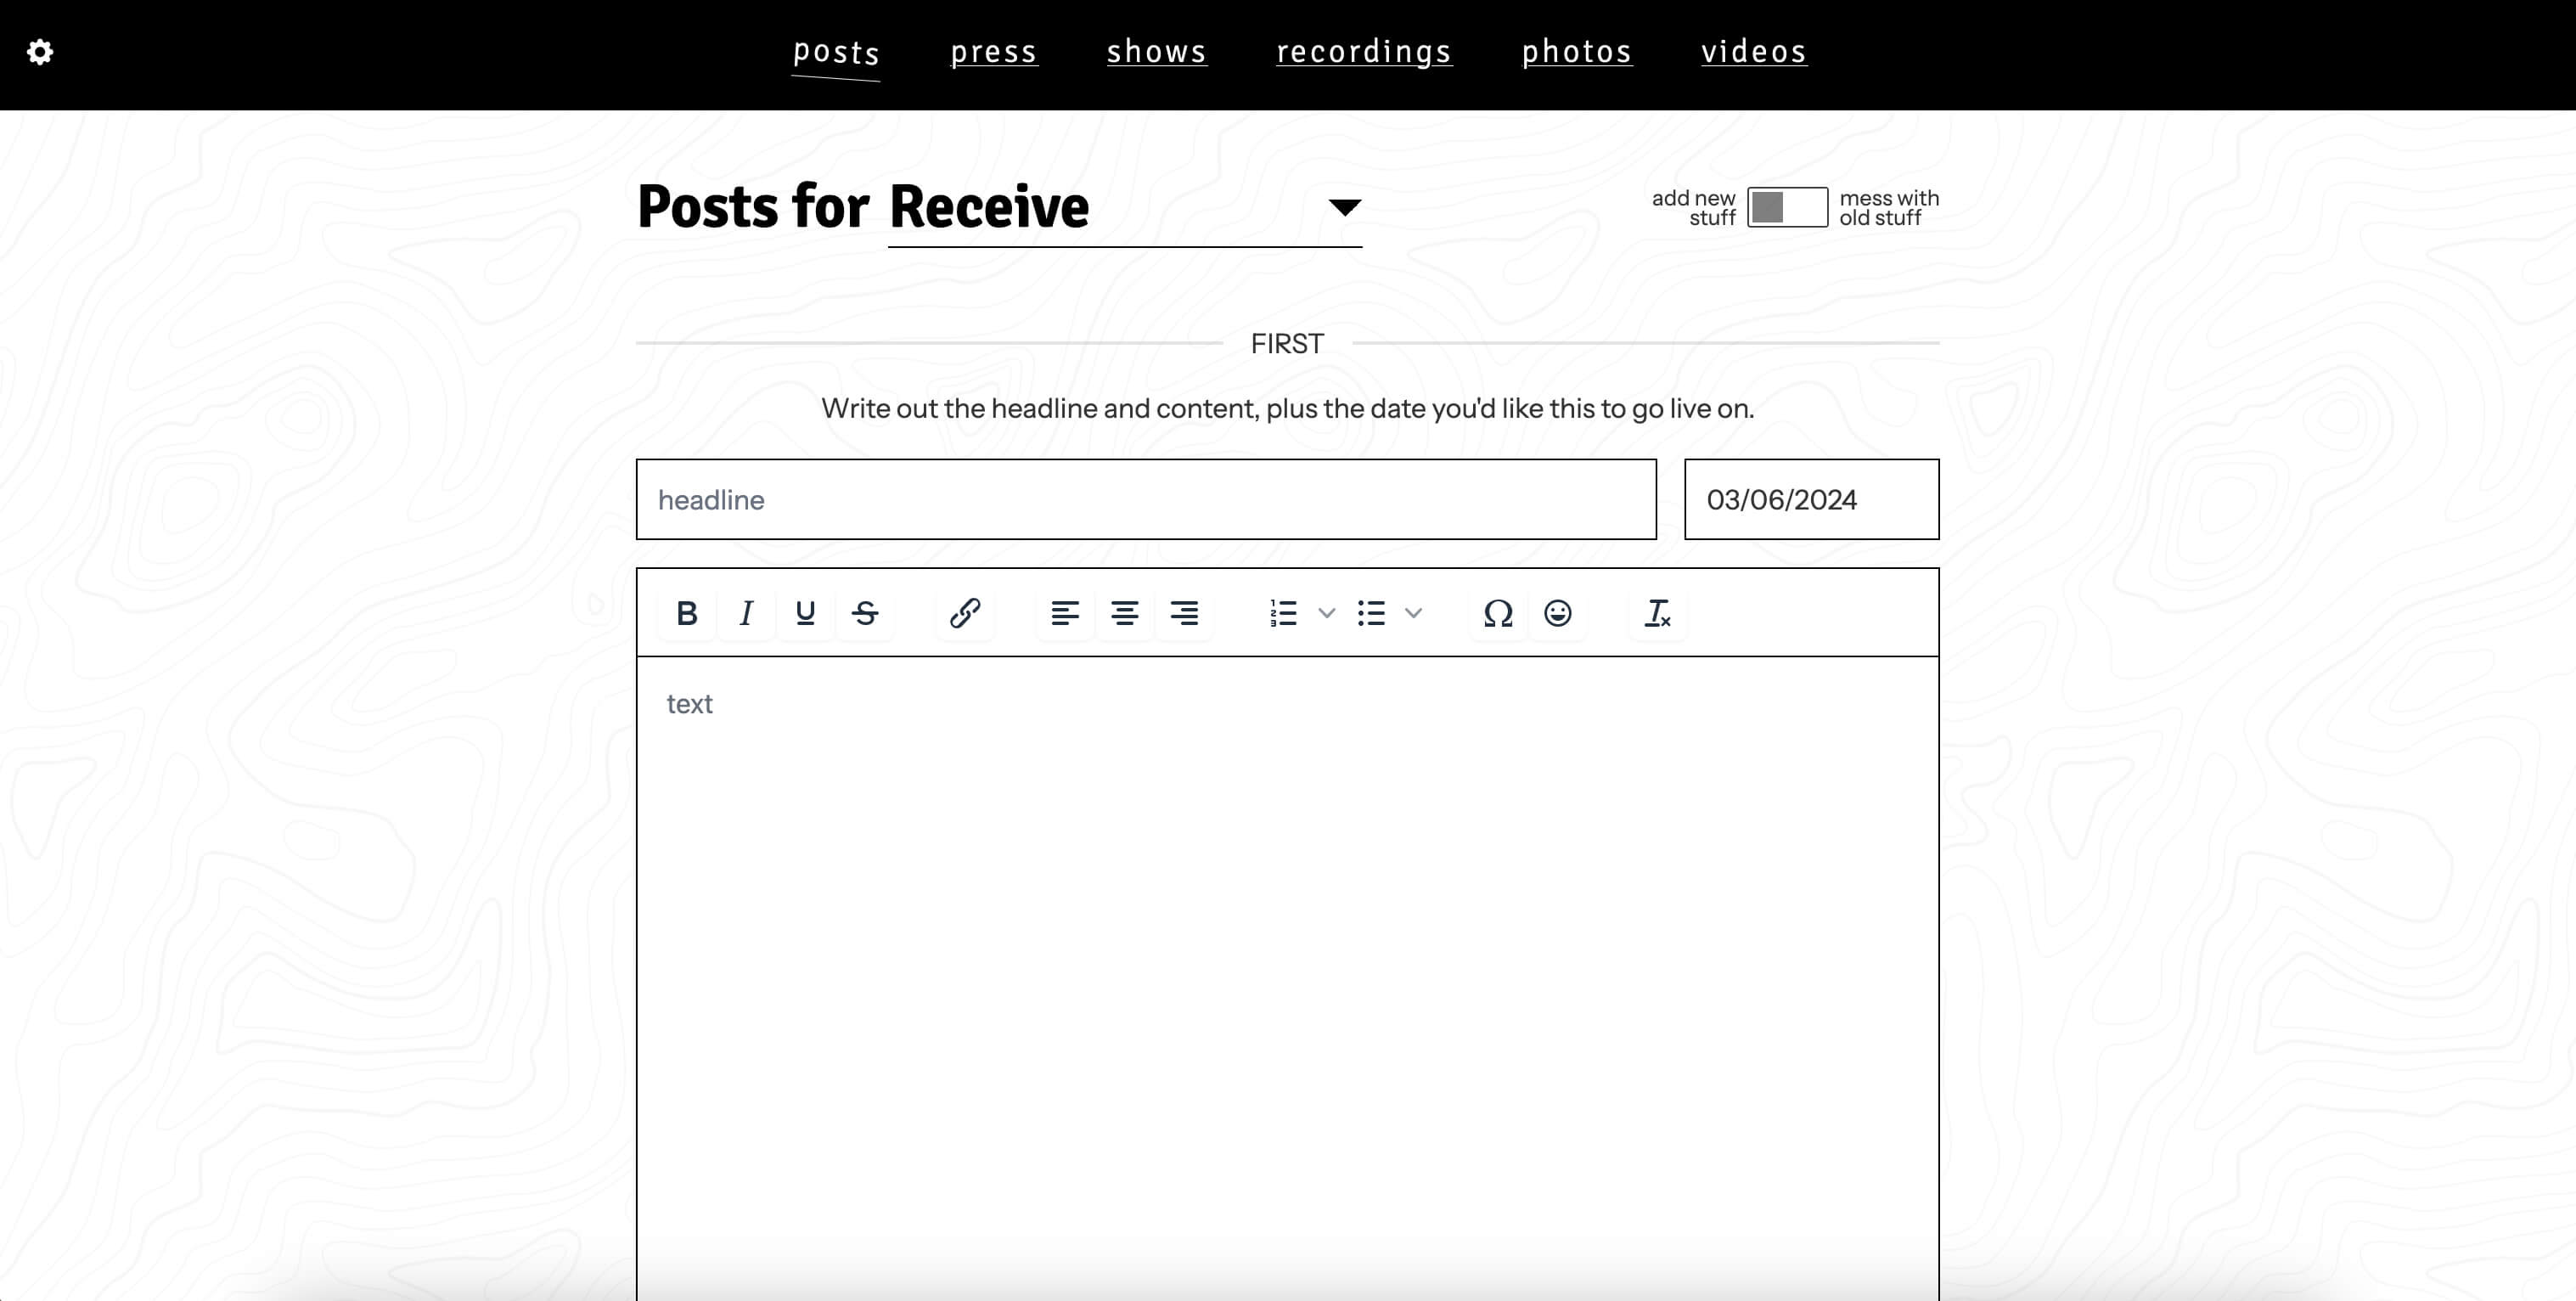 The form for entering a post within the custom CMS frontend